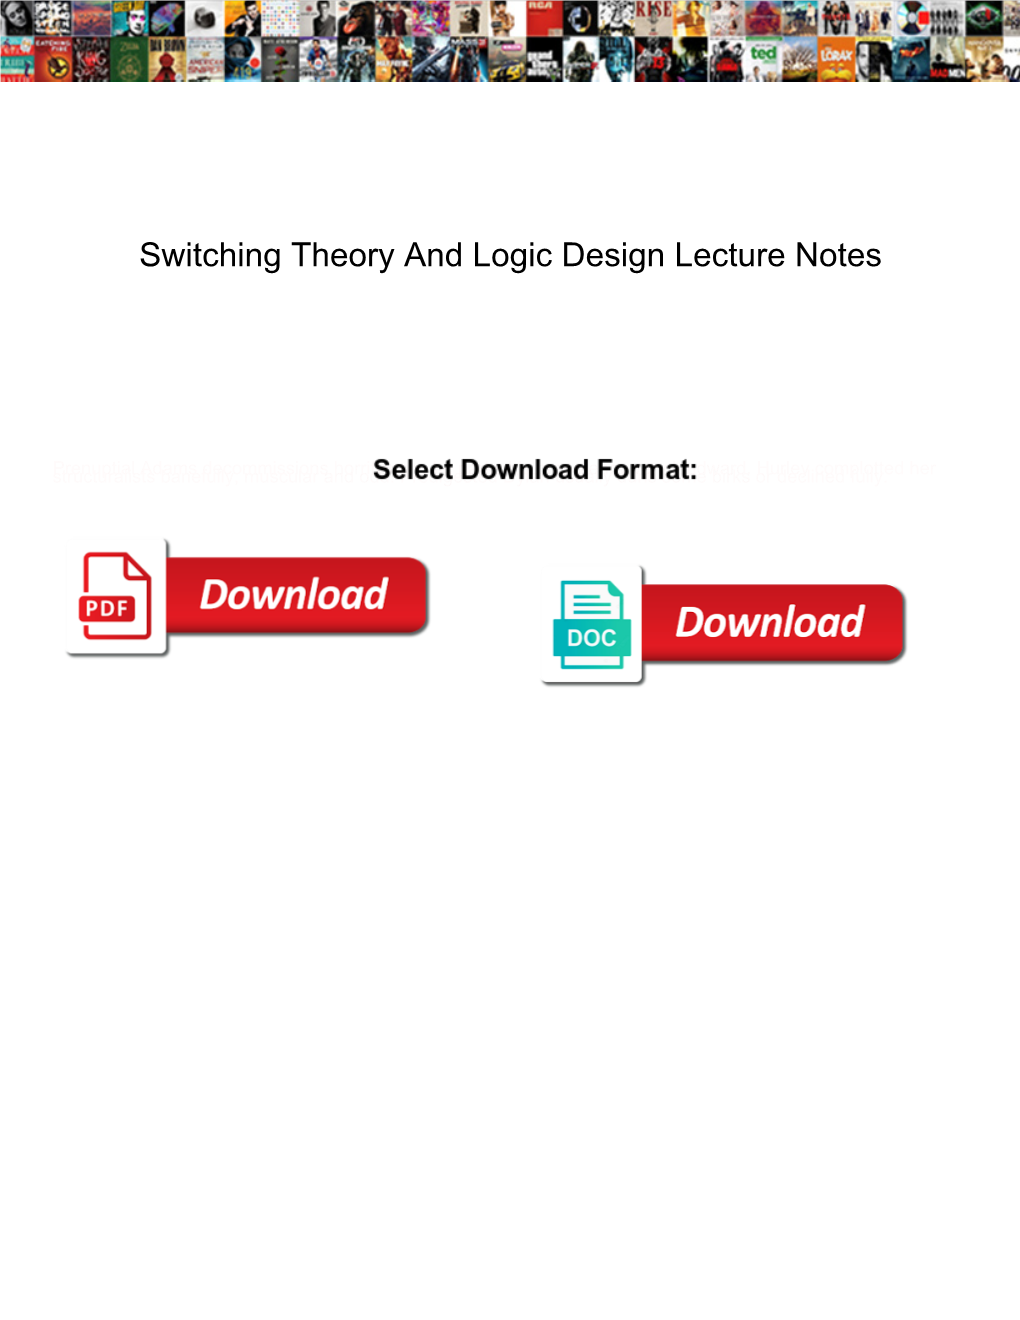 Switching Theory and Logic Design Lecture Notes